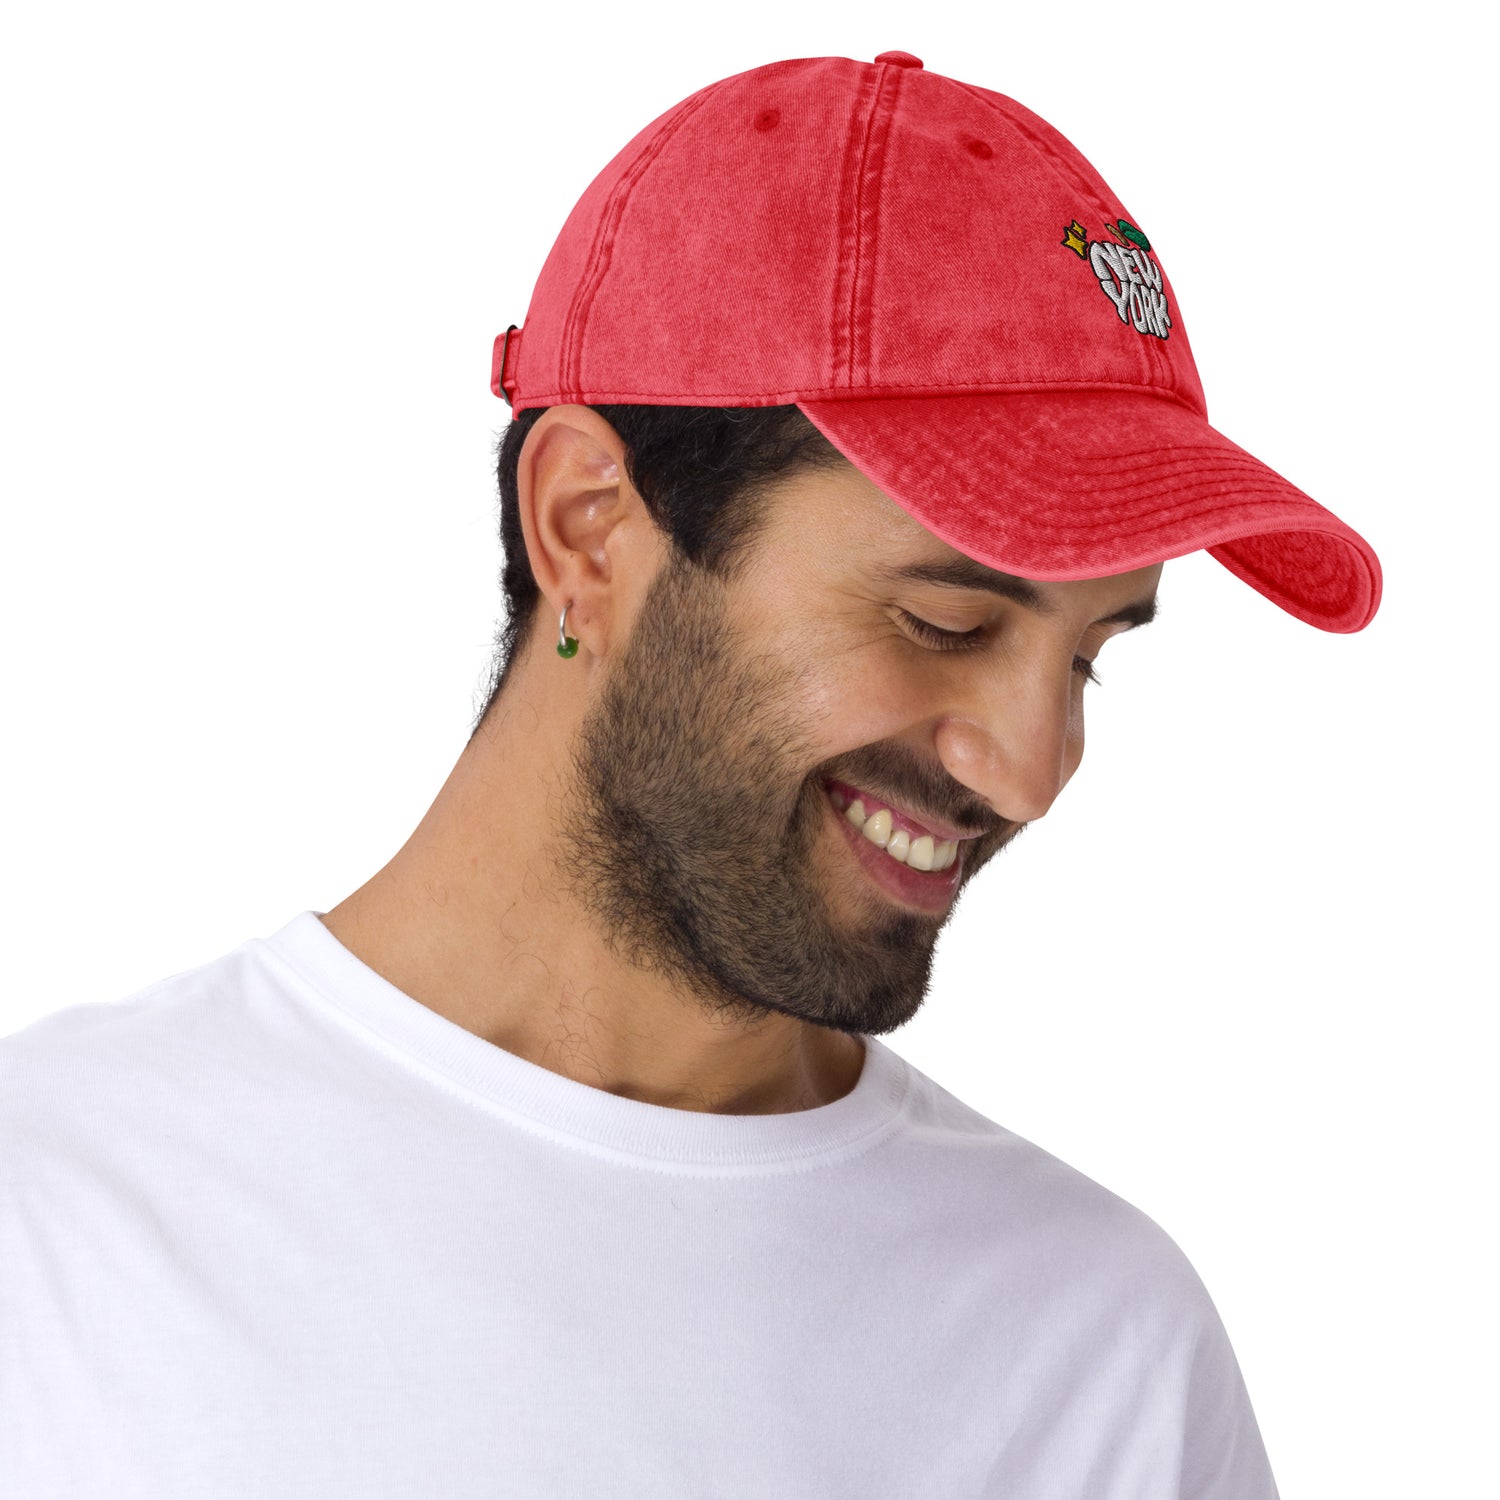 New York Apple Logo Embroidered Red Vintage Cotton Twill Hat Scattered Streetwear